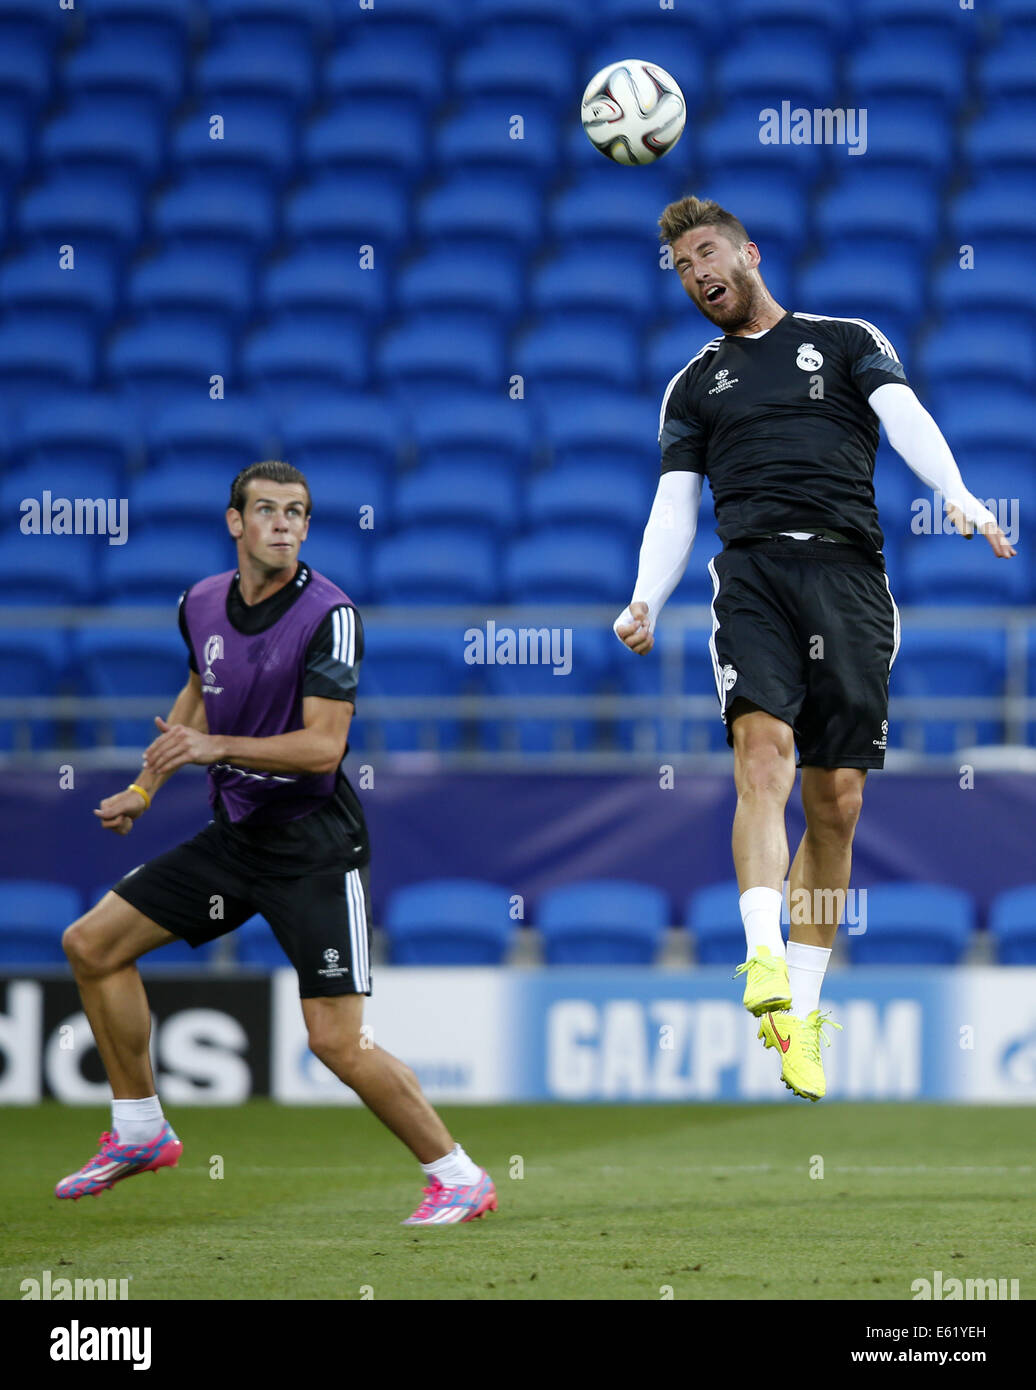 Cardiff. 11th Aug, 2014. Ramos(R) and Gareth Bale of Real Madrid take a training session for the UEFA Super Cup match between Real Madrid and Sevilla at Cardiff City Stadium in Cardiff, Britain on Aug. 11, 2014. © Wang Lili/Xinhua/Alamy Live News Stock Photo